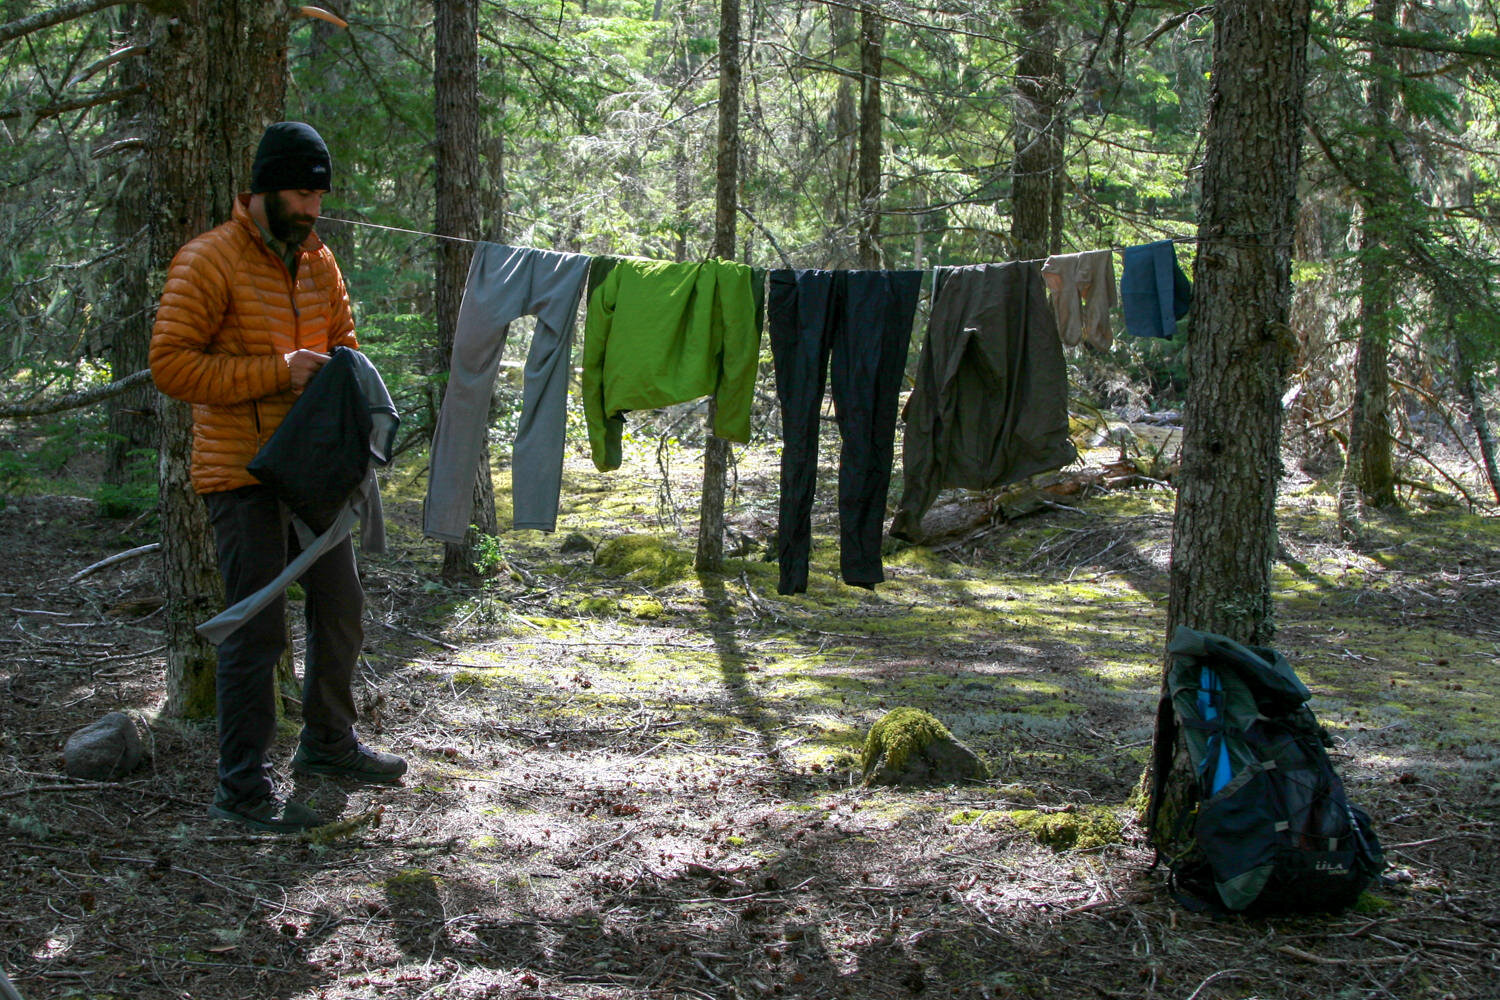 https://www.cleverhiker.com/wp-content/uploads/2020/11/a-backpacking-hanging-clothes-on-a-clothesline.jpeg